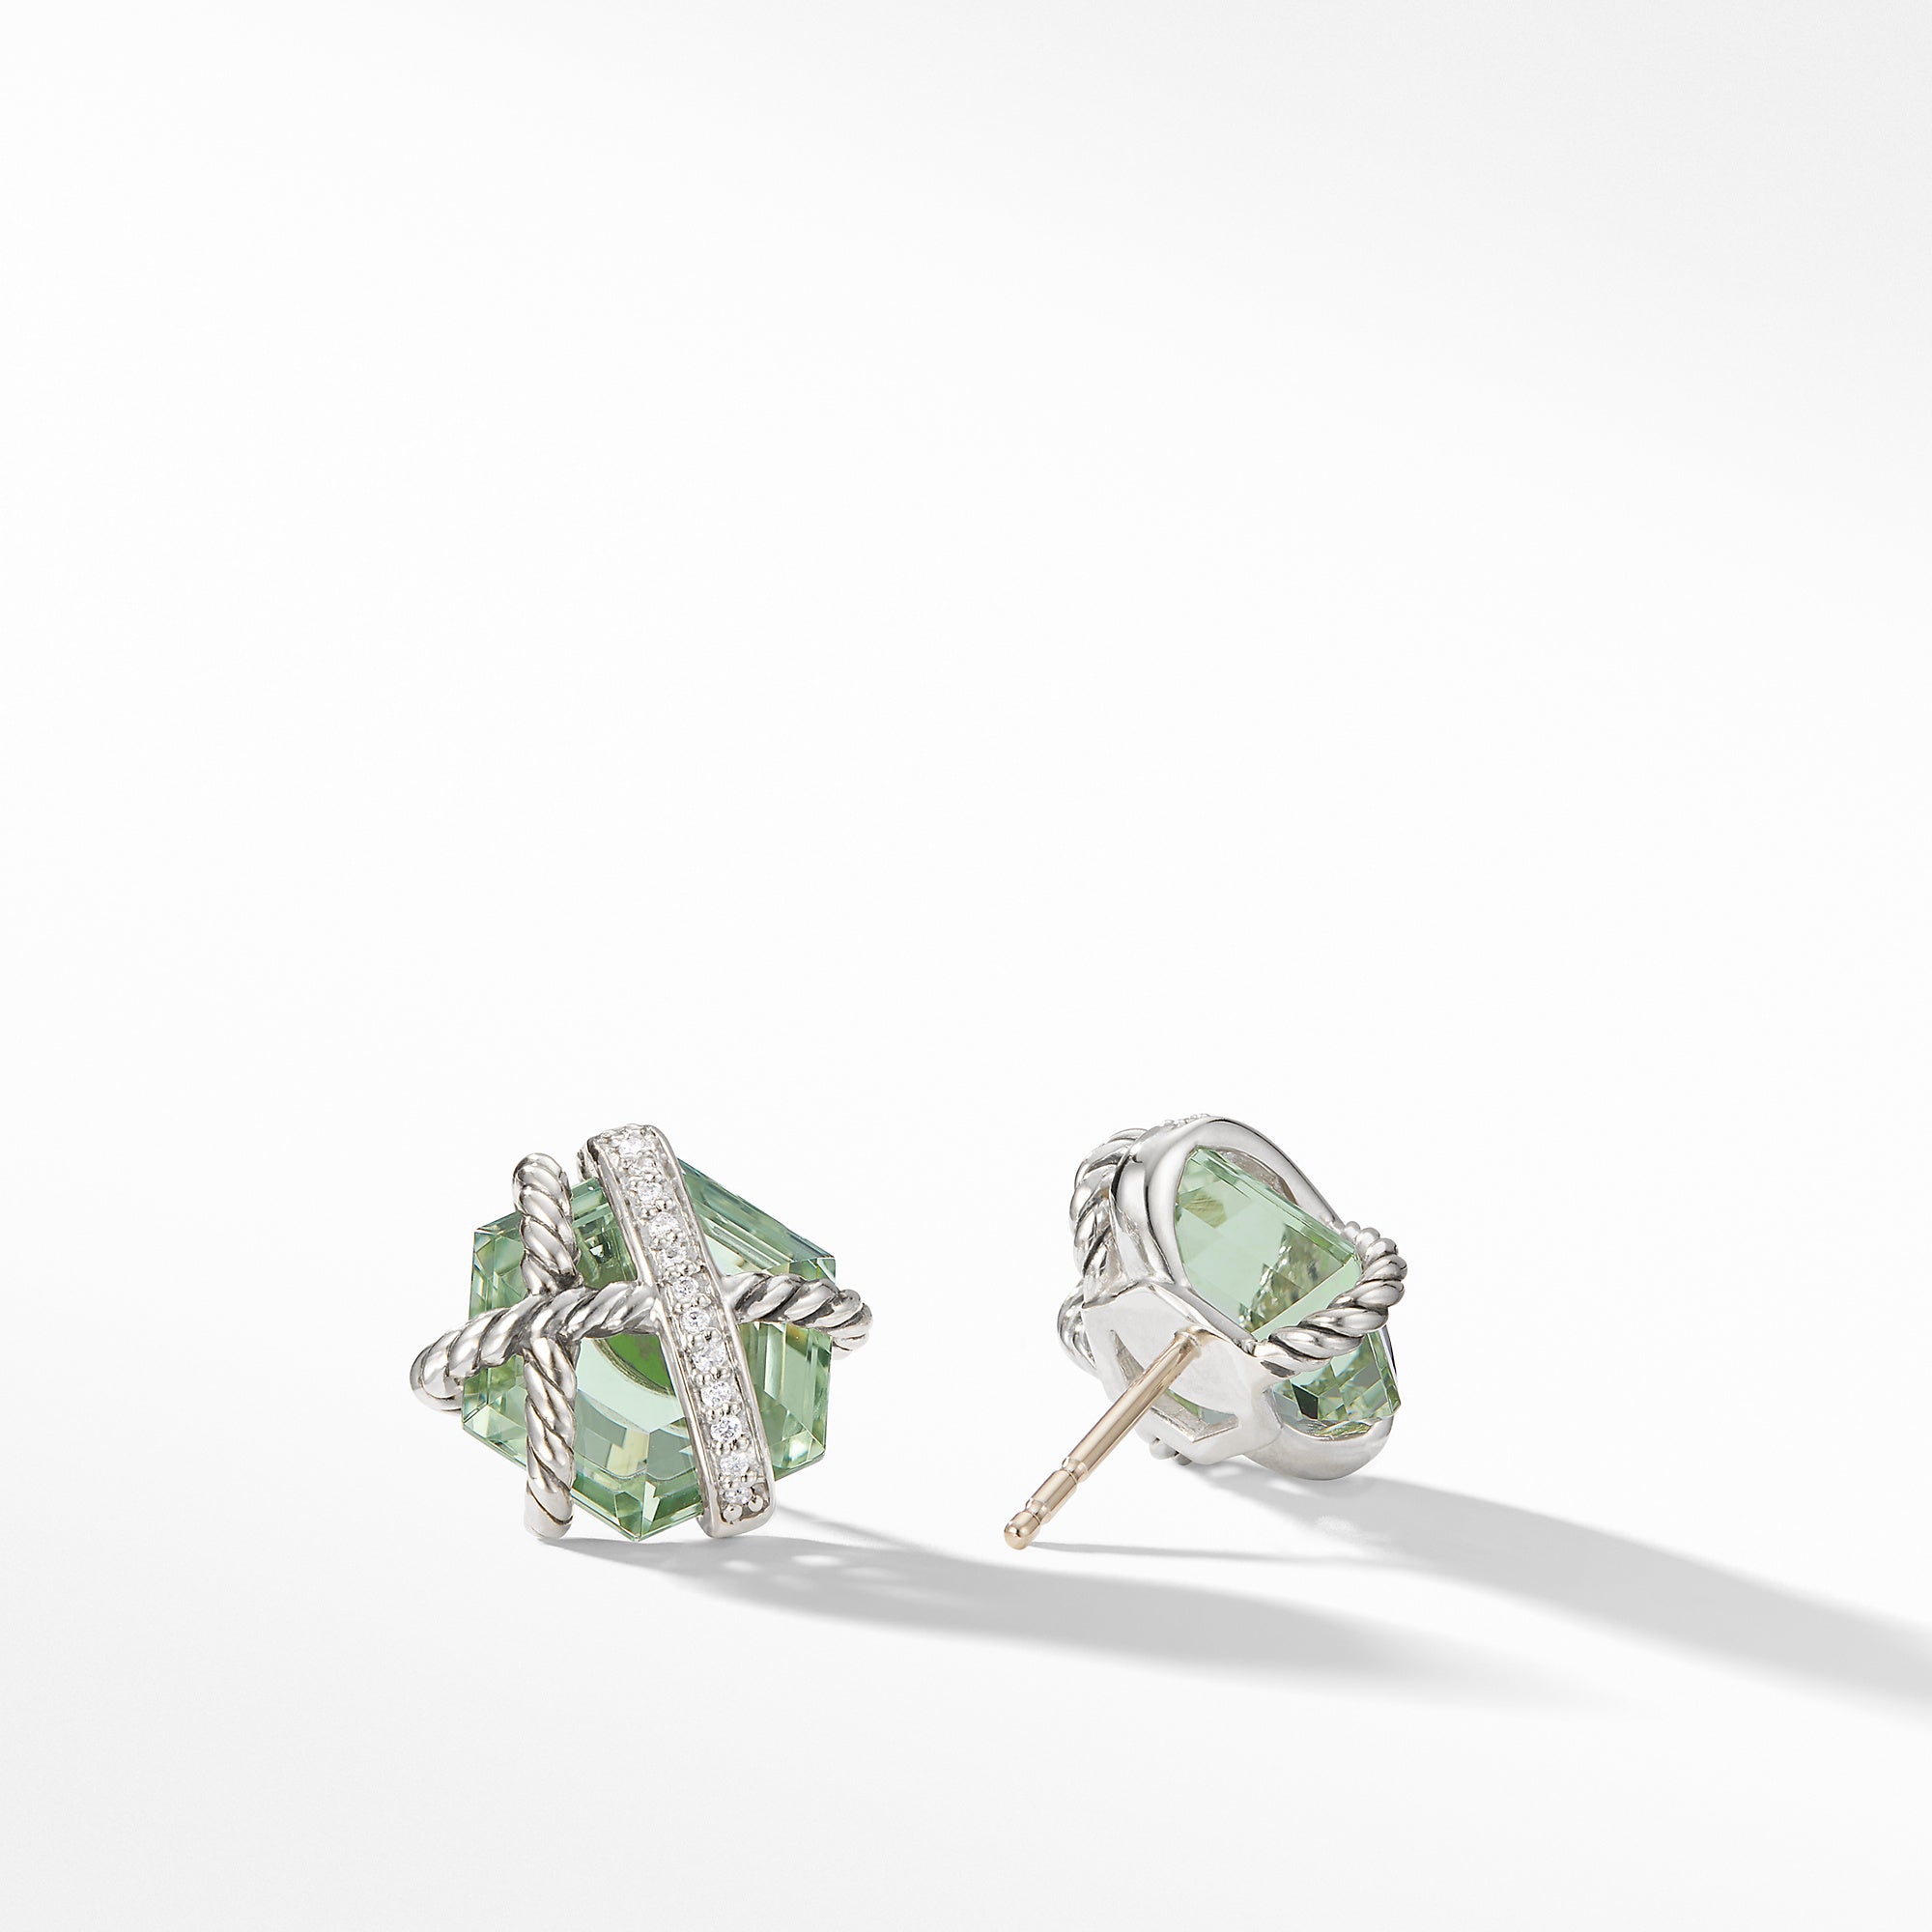 Cable Wrap Earrings with Prasiolite and Diamonds